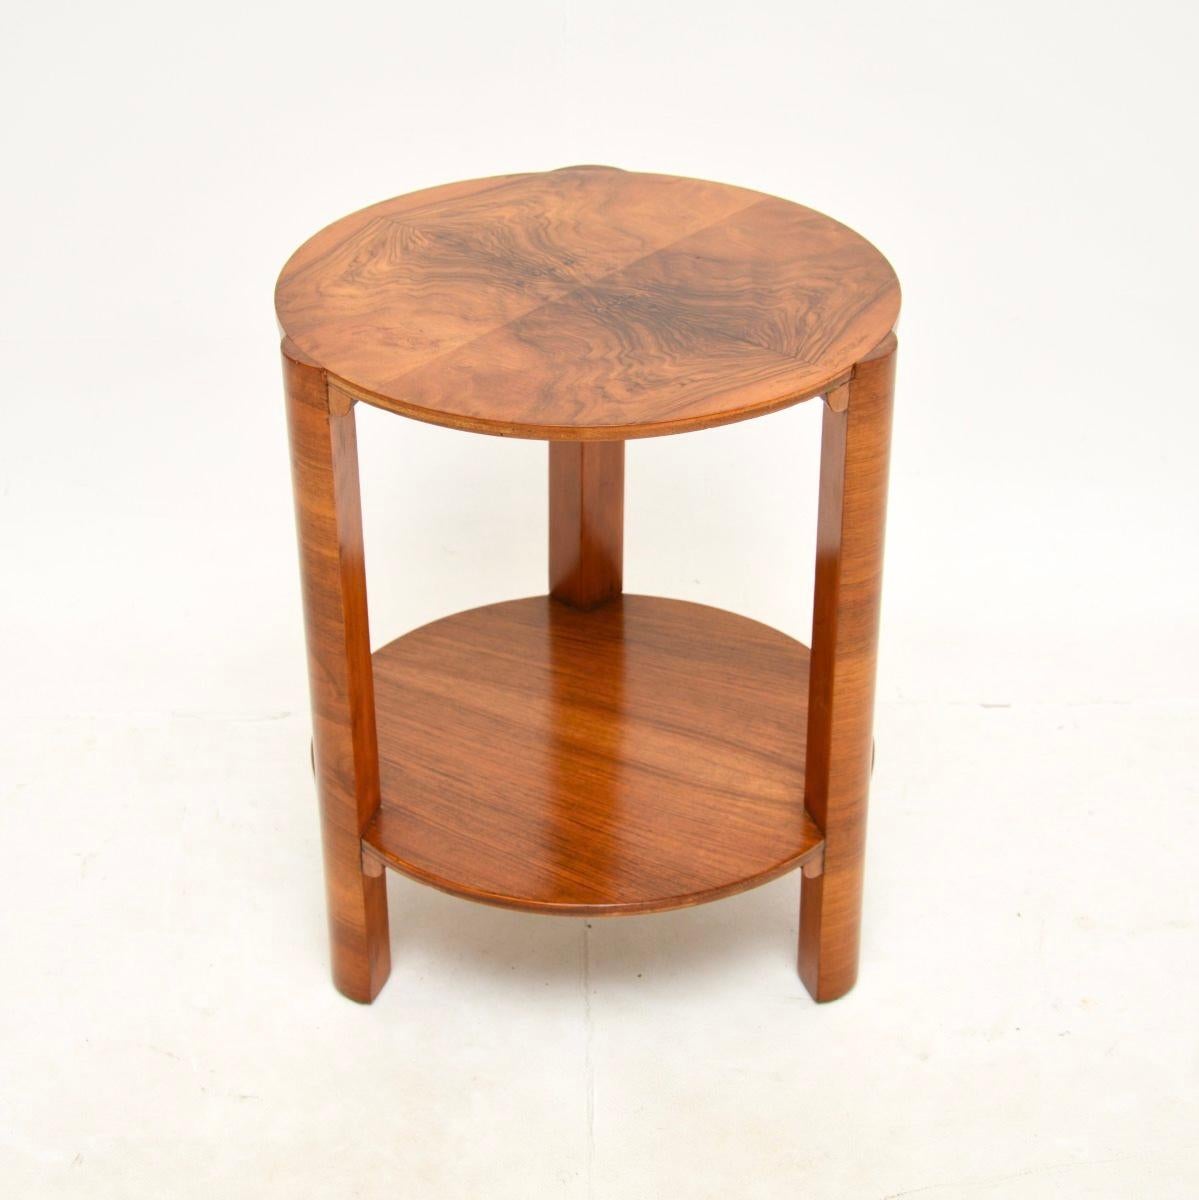 A stylish and well made Art Deco figured walnut occasional side table. This was made in England, it dates from the 1920-30’s.

It is of lovely quality and is a very useful size for use in various settings around the home. The circular top and lower